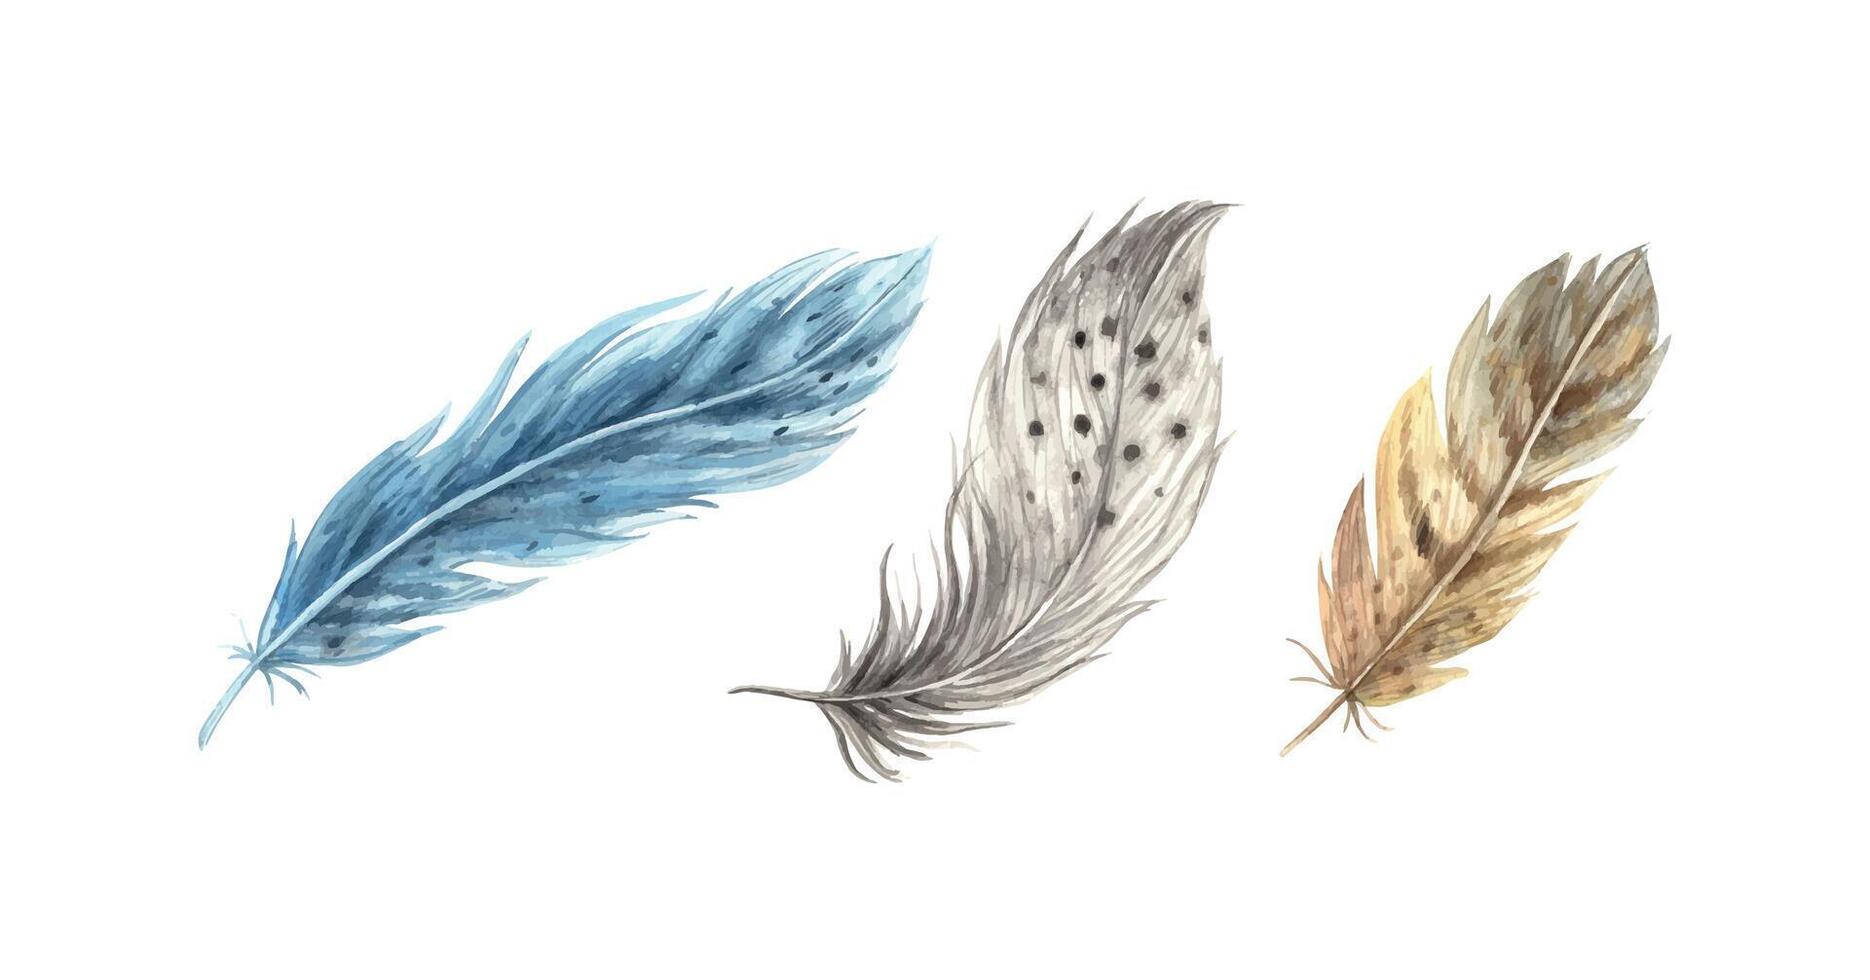 Set of watercolor realistic feathers. Detailed bird feathers in a realistic style. Illustration hand drawn on isolated background for greeting cards, invitations, happy holidays, posters vector